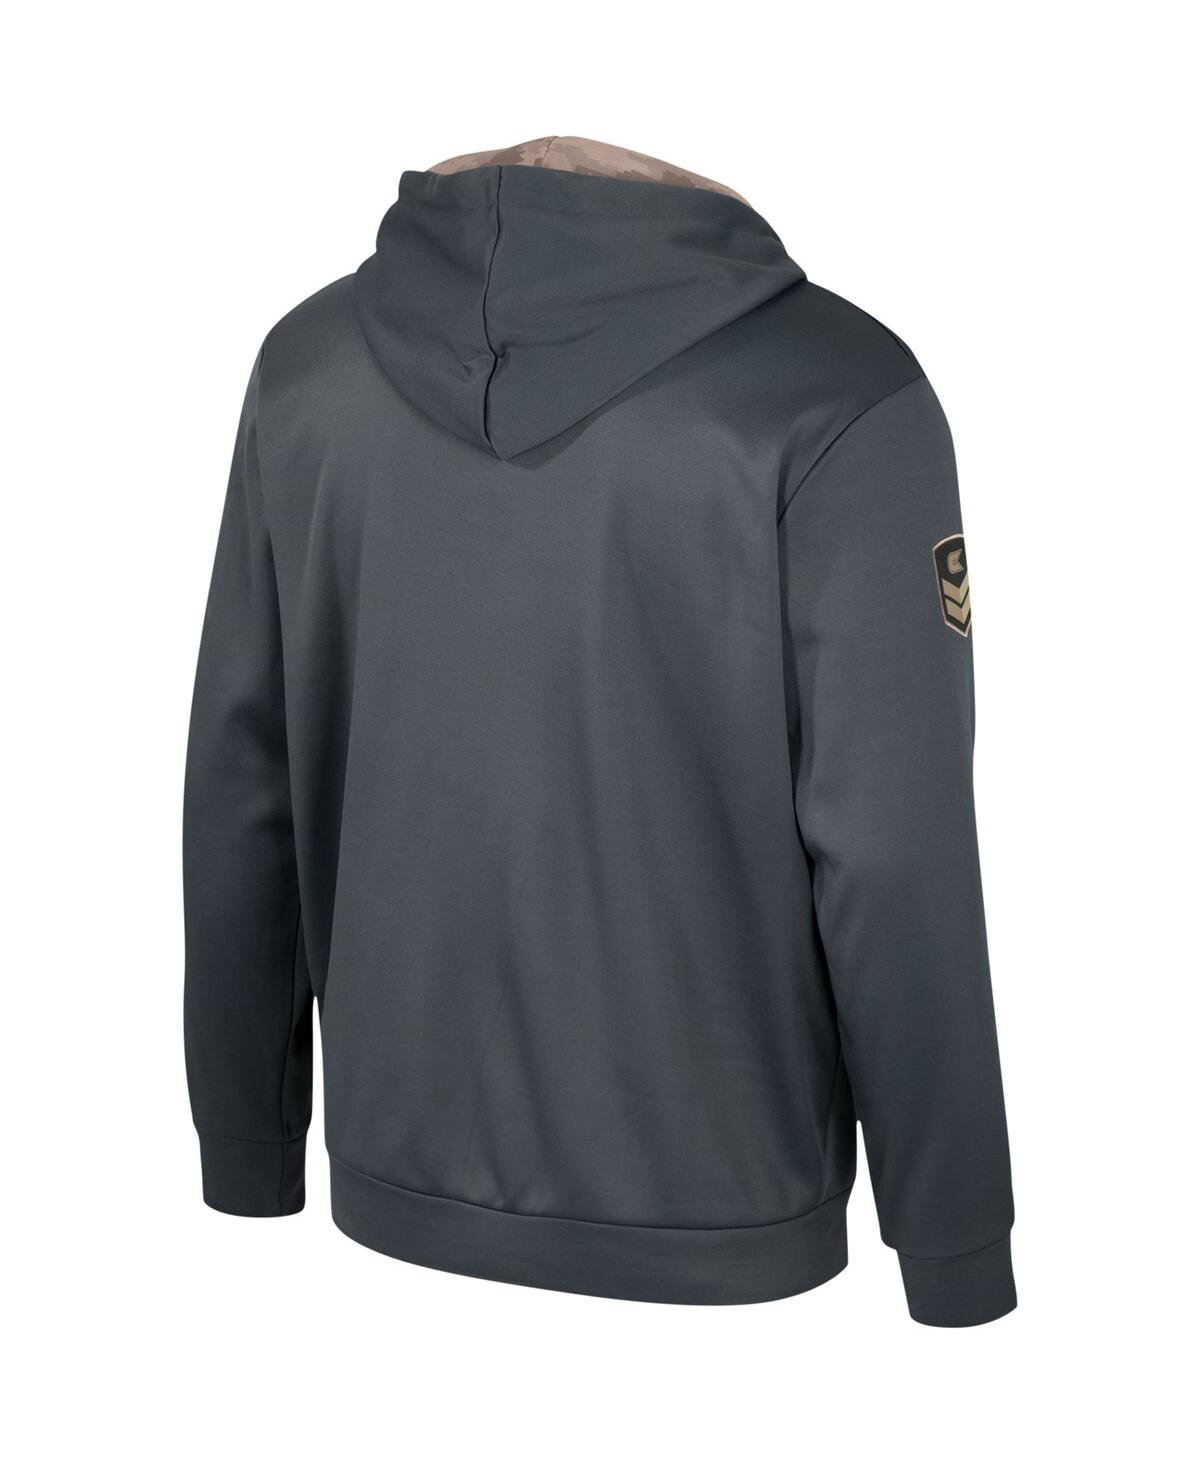 Shop Colosseum Men's  Charcoal Michigan State Spartans Oht Military-inspired Appreciation Pullover Hoodie